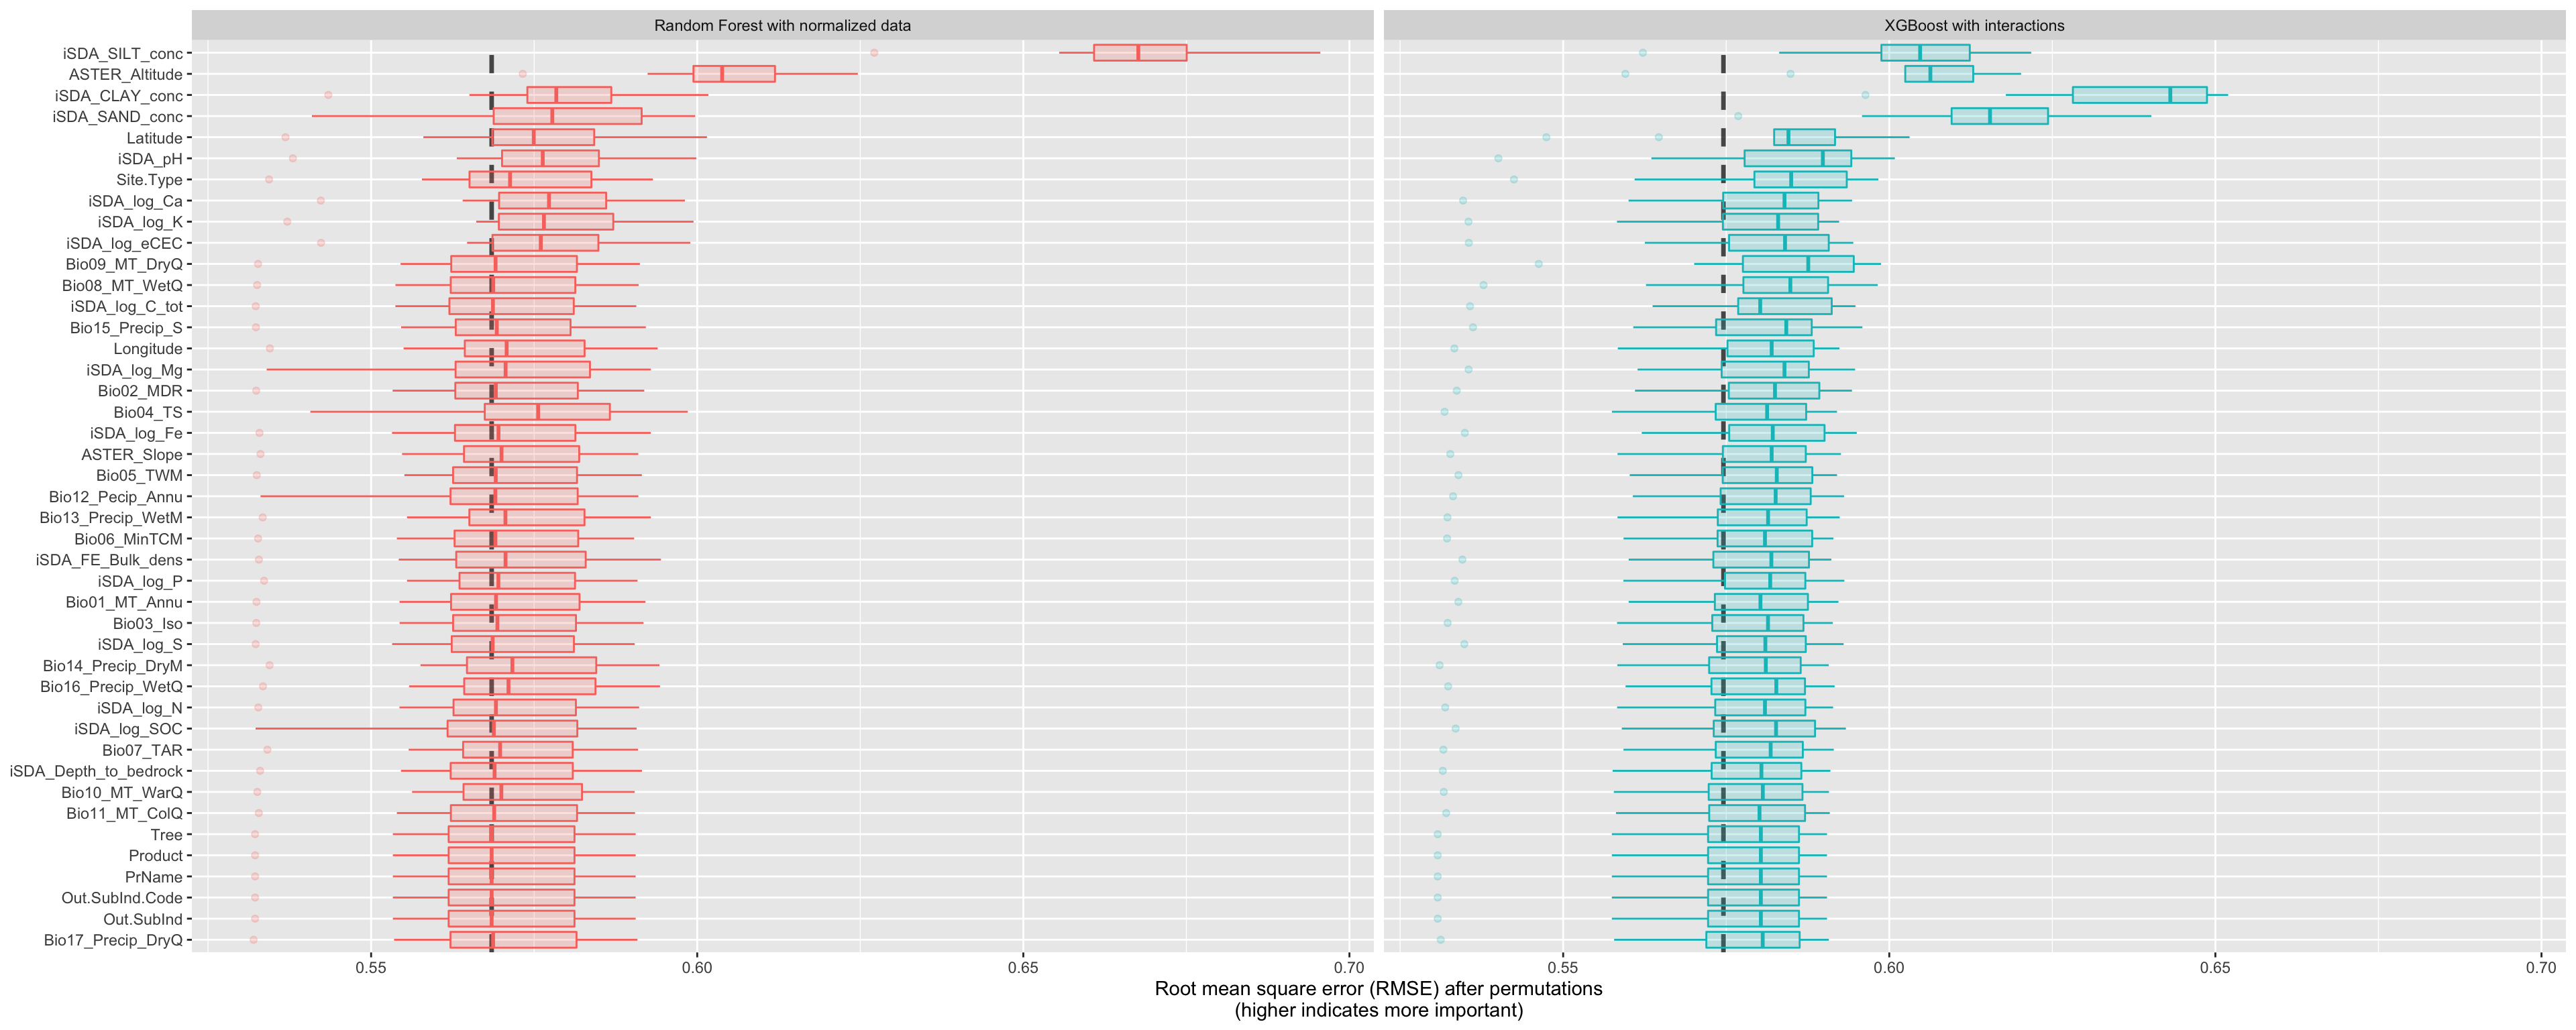 Costumn plot of the vip using the special ggplot function for the tree-based models